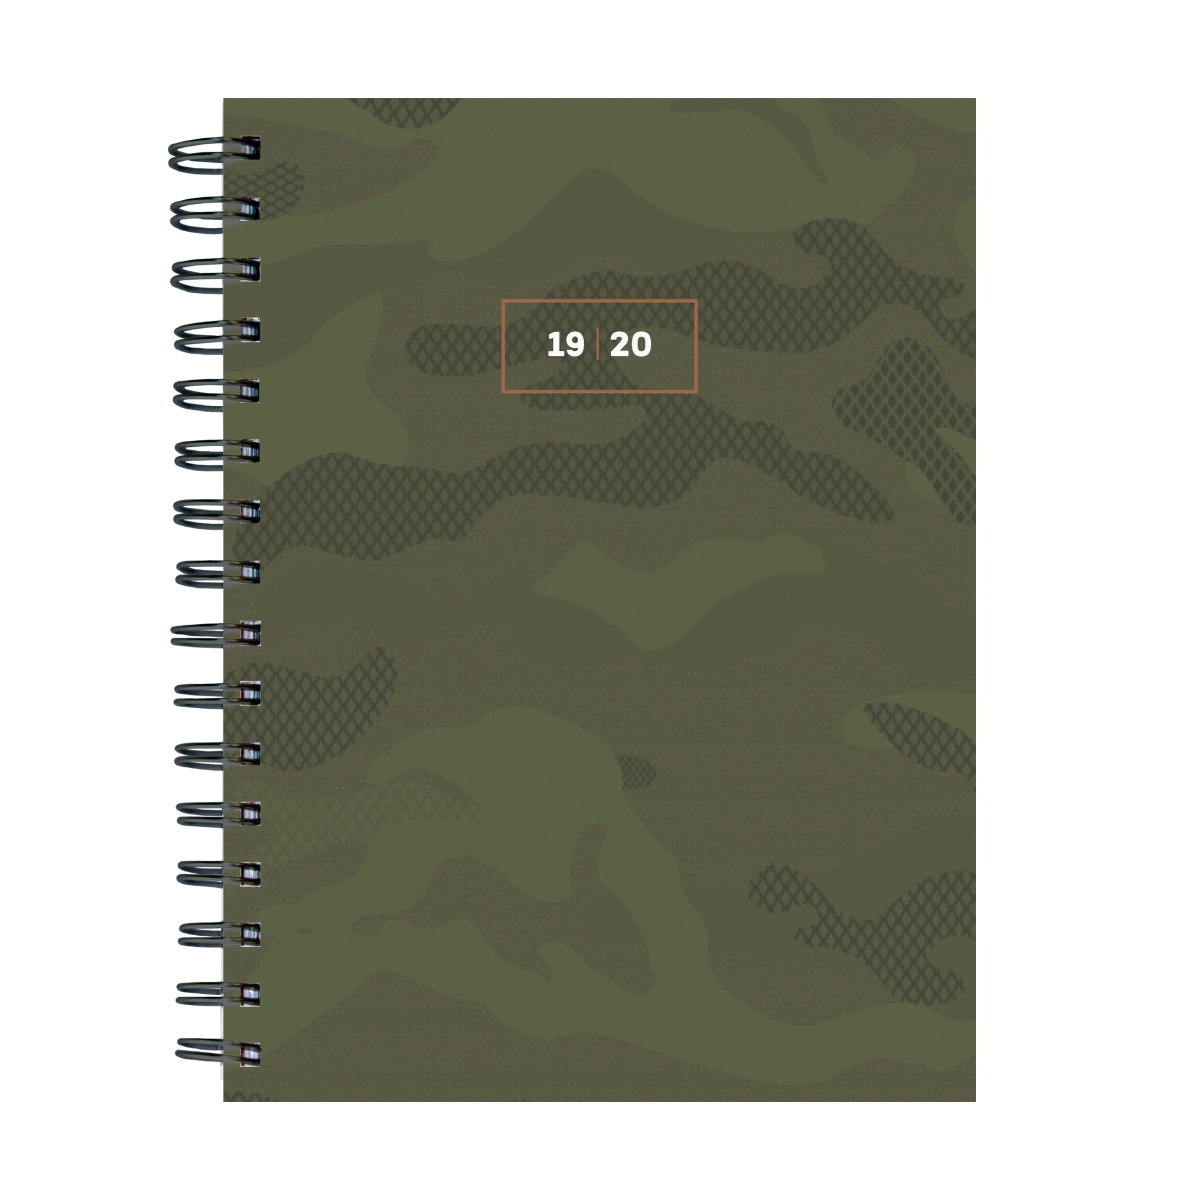 20-9265a July 2019 - June 2020 Camo Medium Daily Weekly Monthly Planner